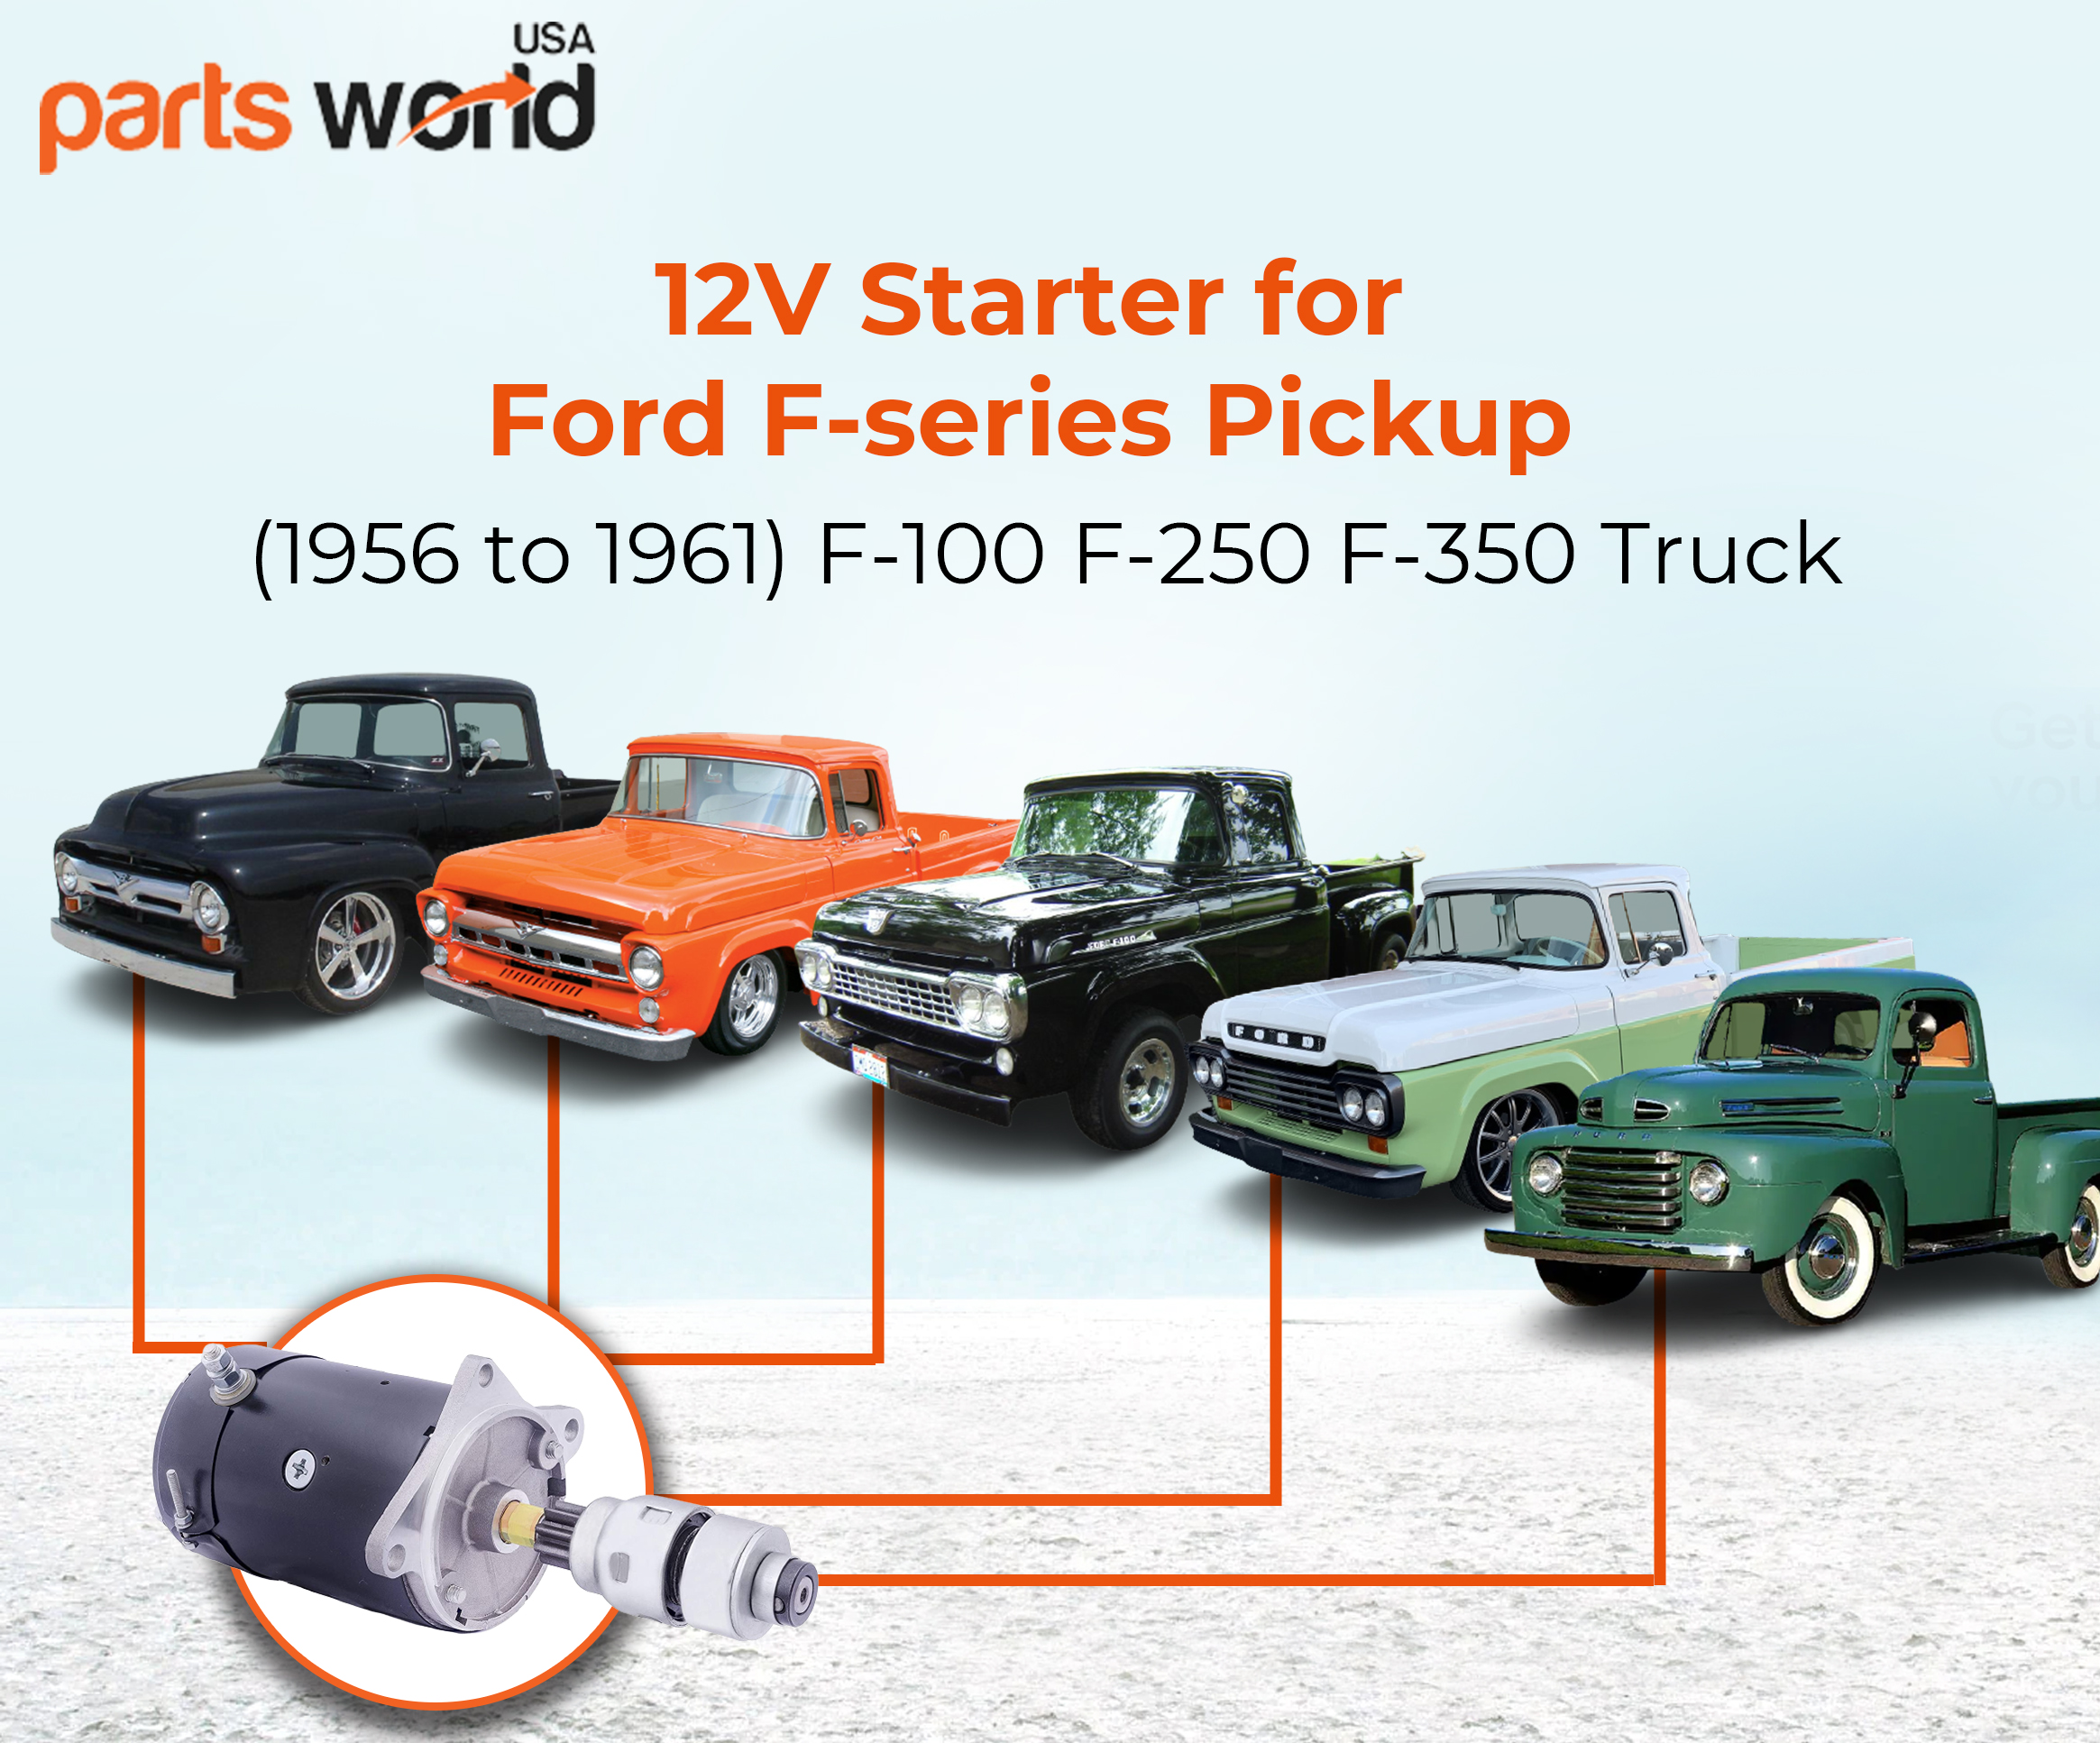 12V Starter for Ford F-100 F-250 F350 Truck (1956 to 1961) F-series Pickups